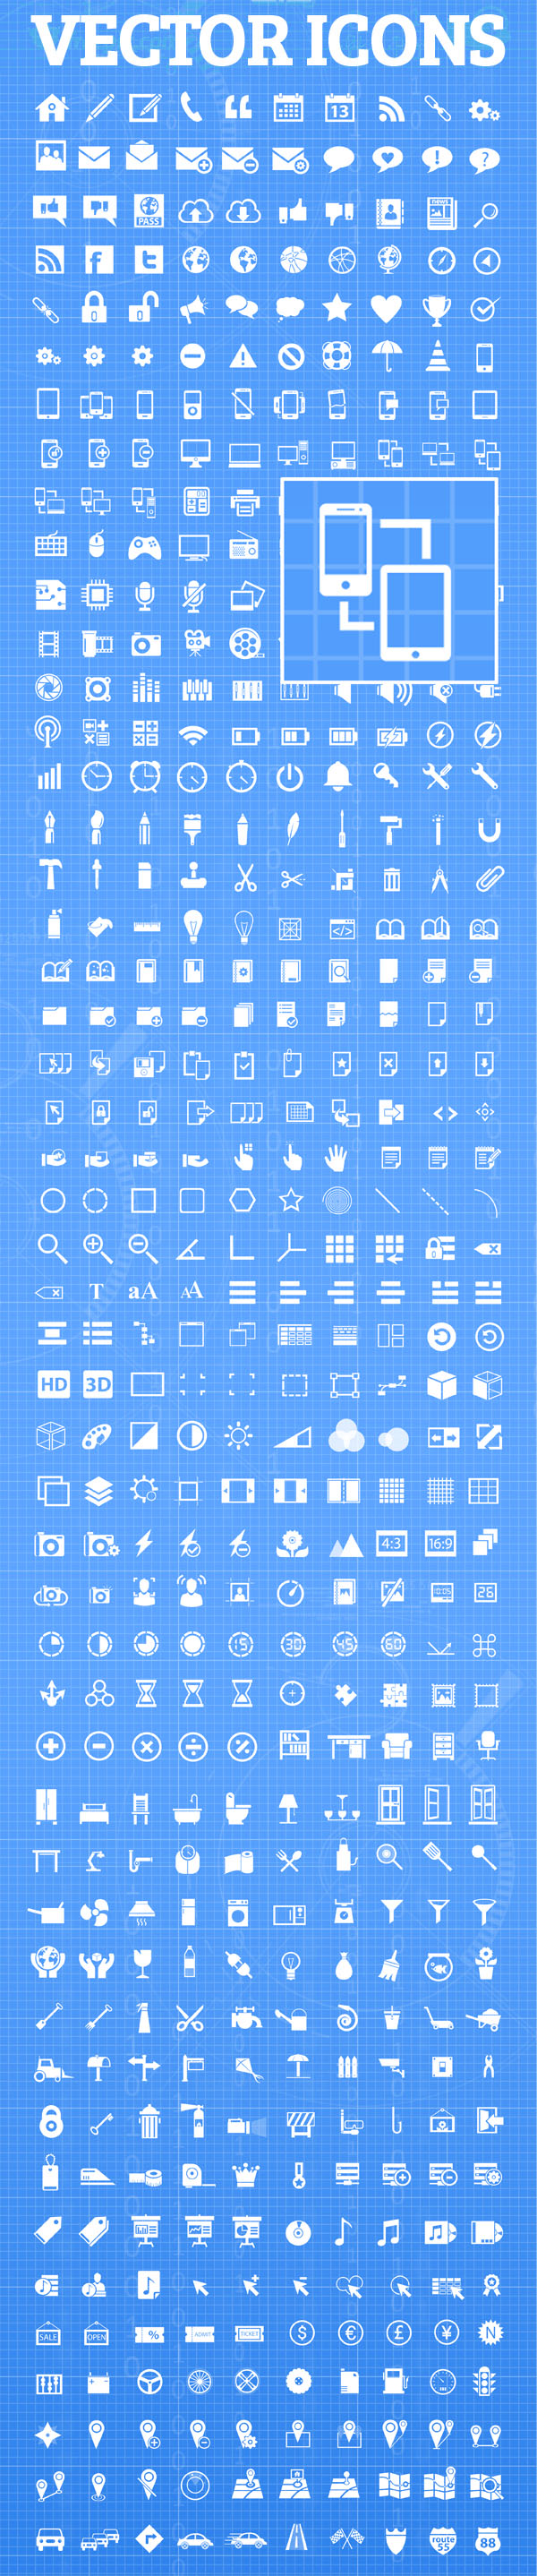 Mega Pack Vector Icons